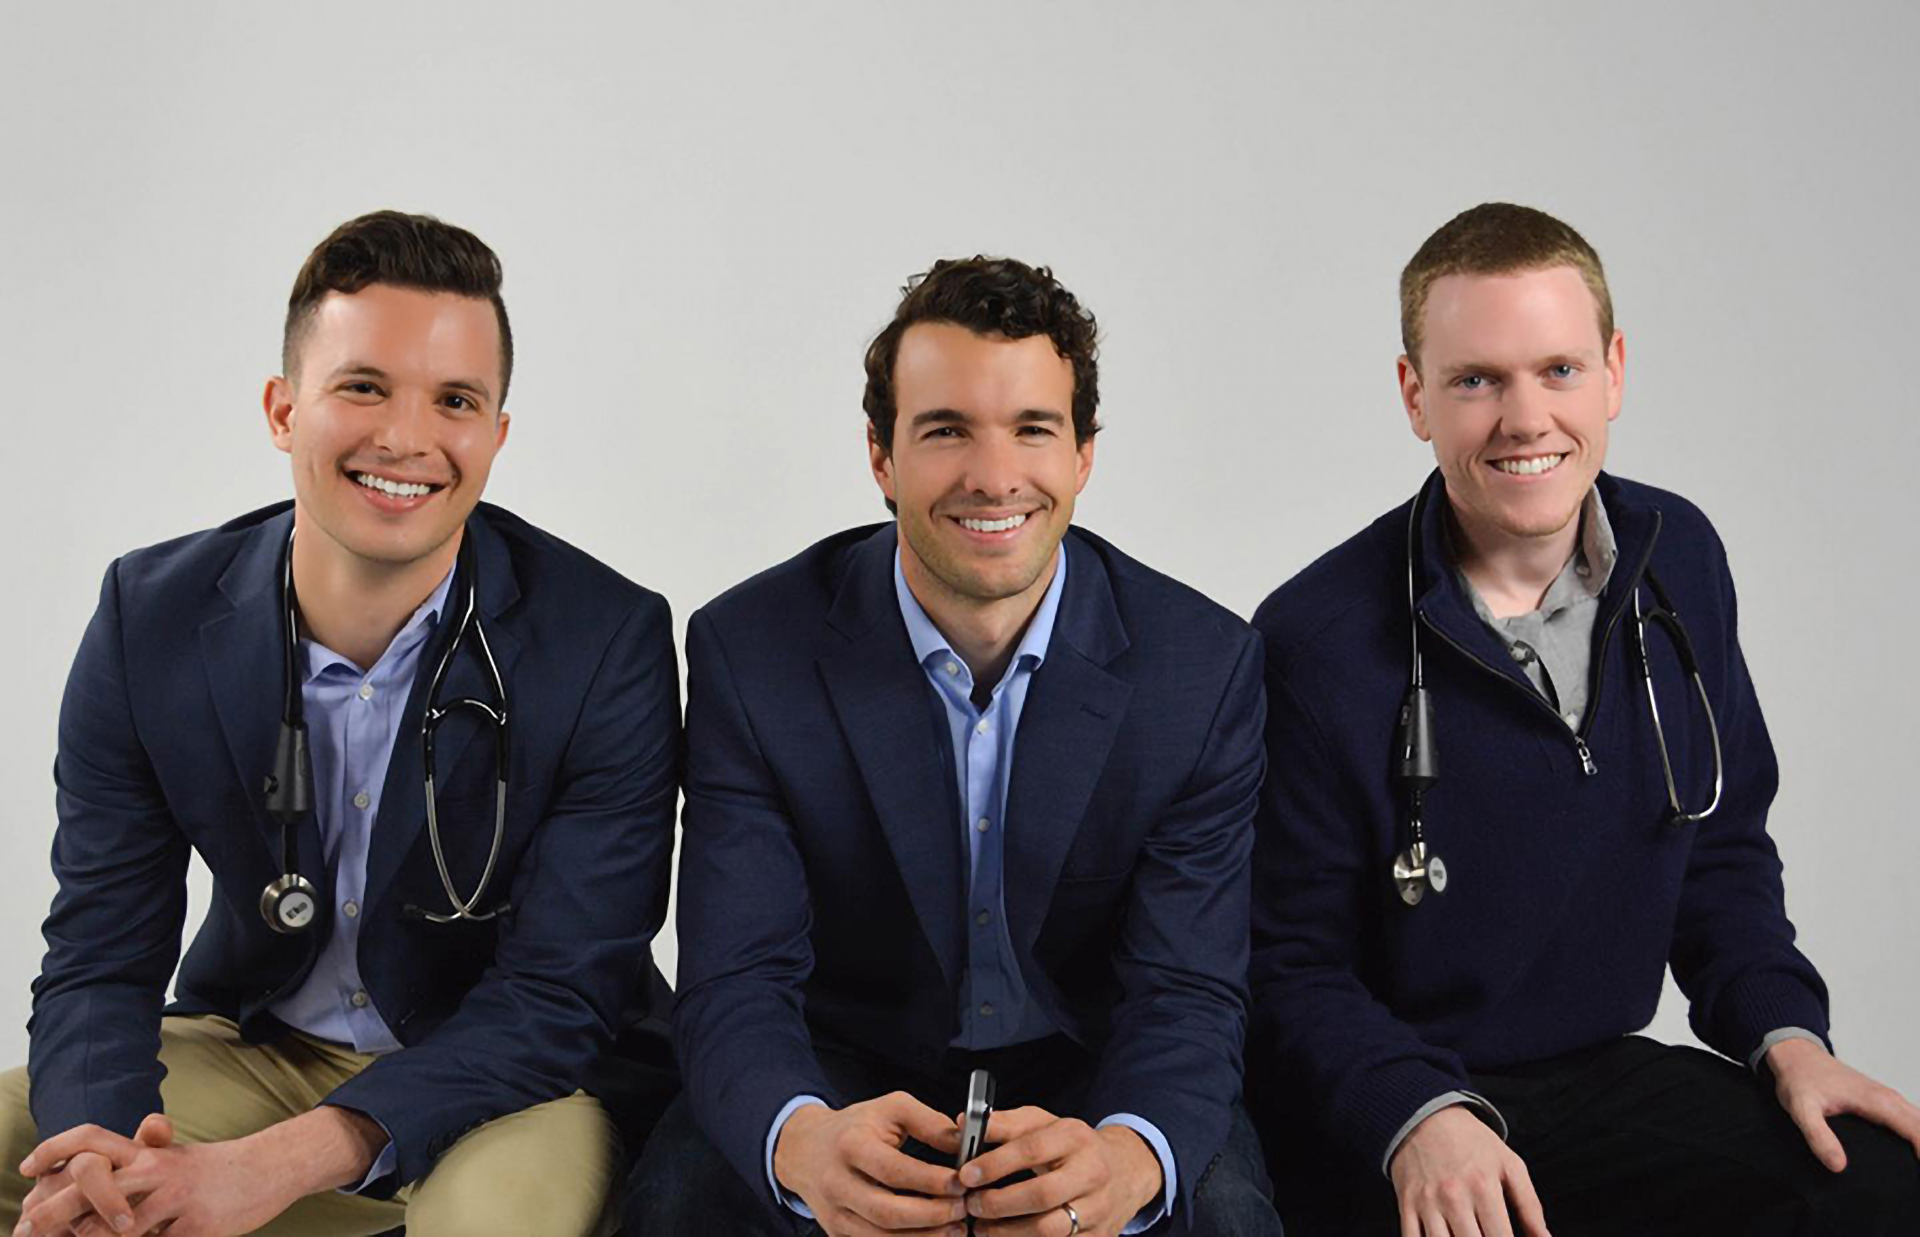 The Founders of Eko Health: Connor Landgraf (middle, CEO), Tyler Crouch (right, Head of Education Product), Jason Bellet (left, Board Member).